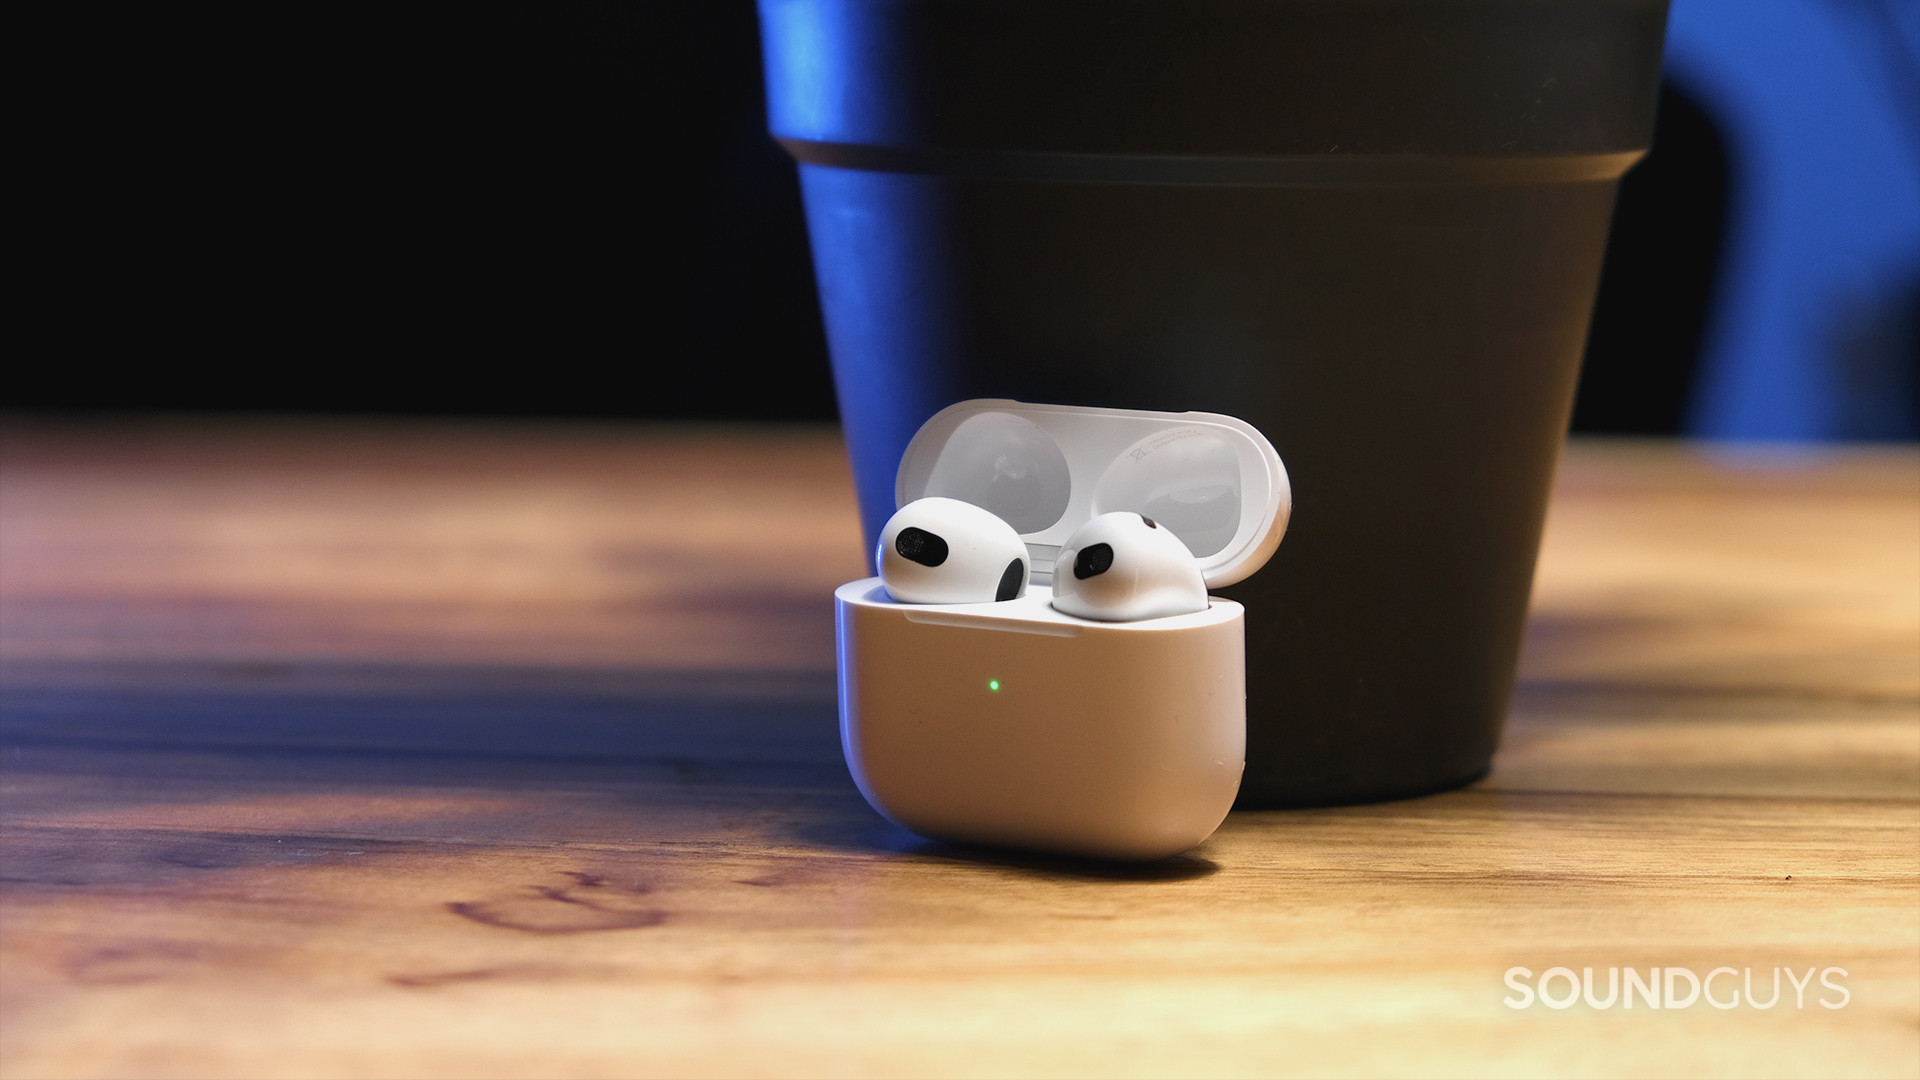 The Apple AirPods (3rd generation) rest against a potted plant.